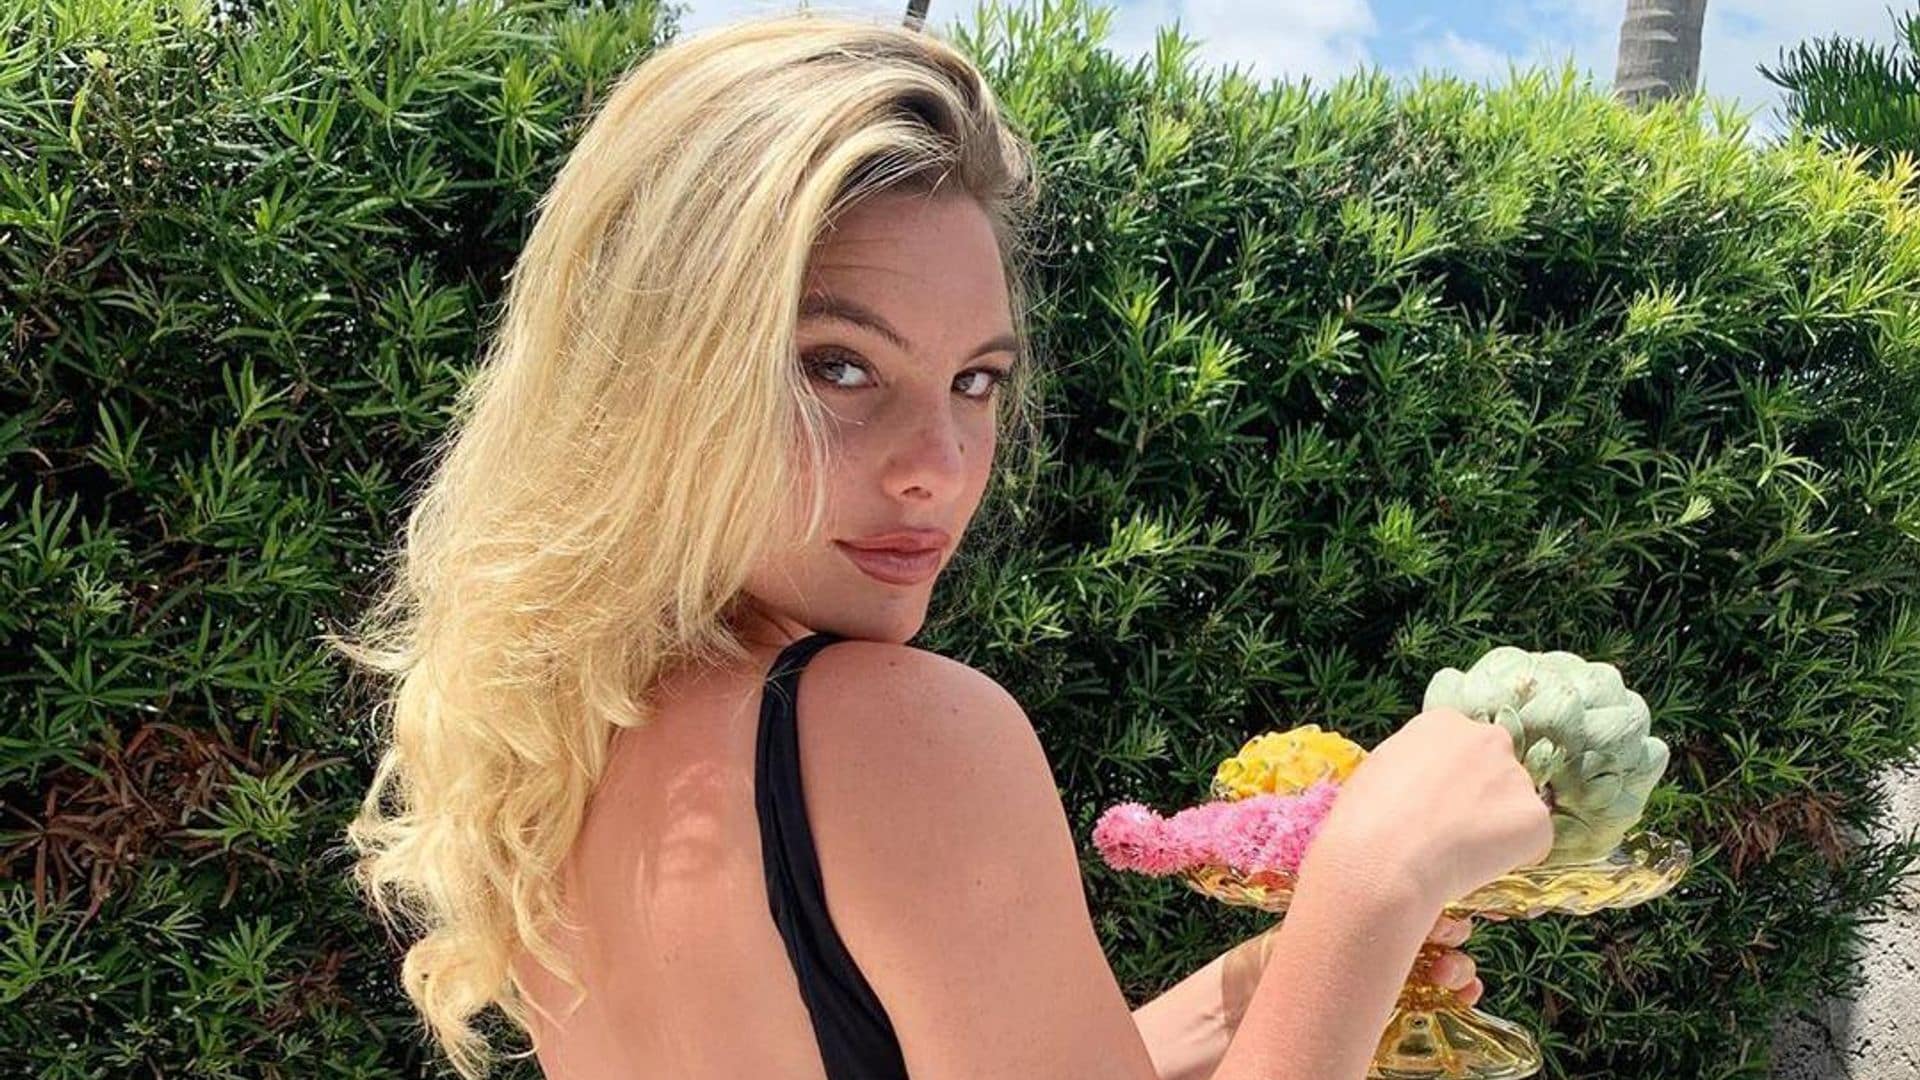 Lele Pons shows what happens when you don’t use sunscreen